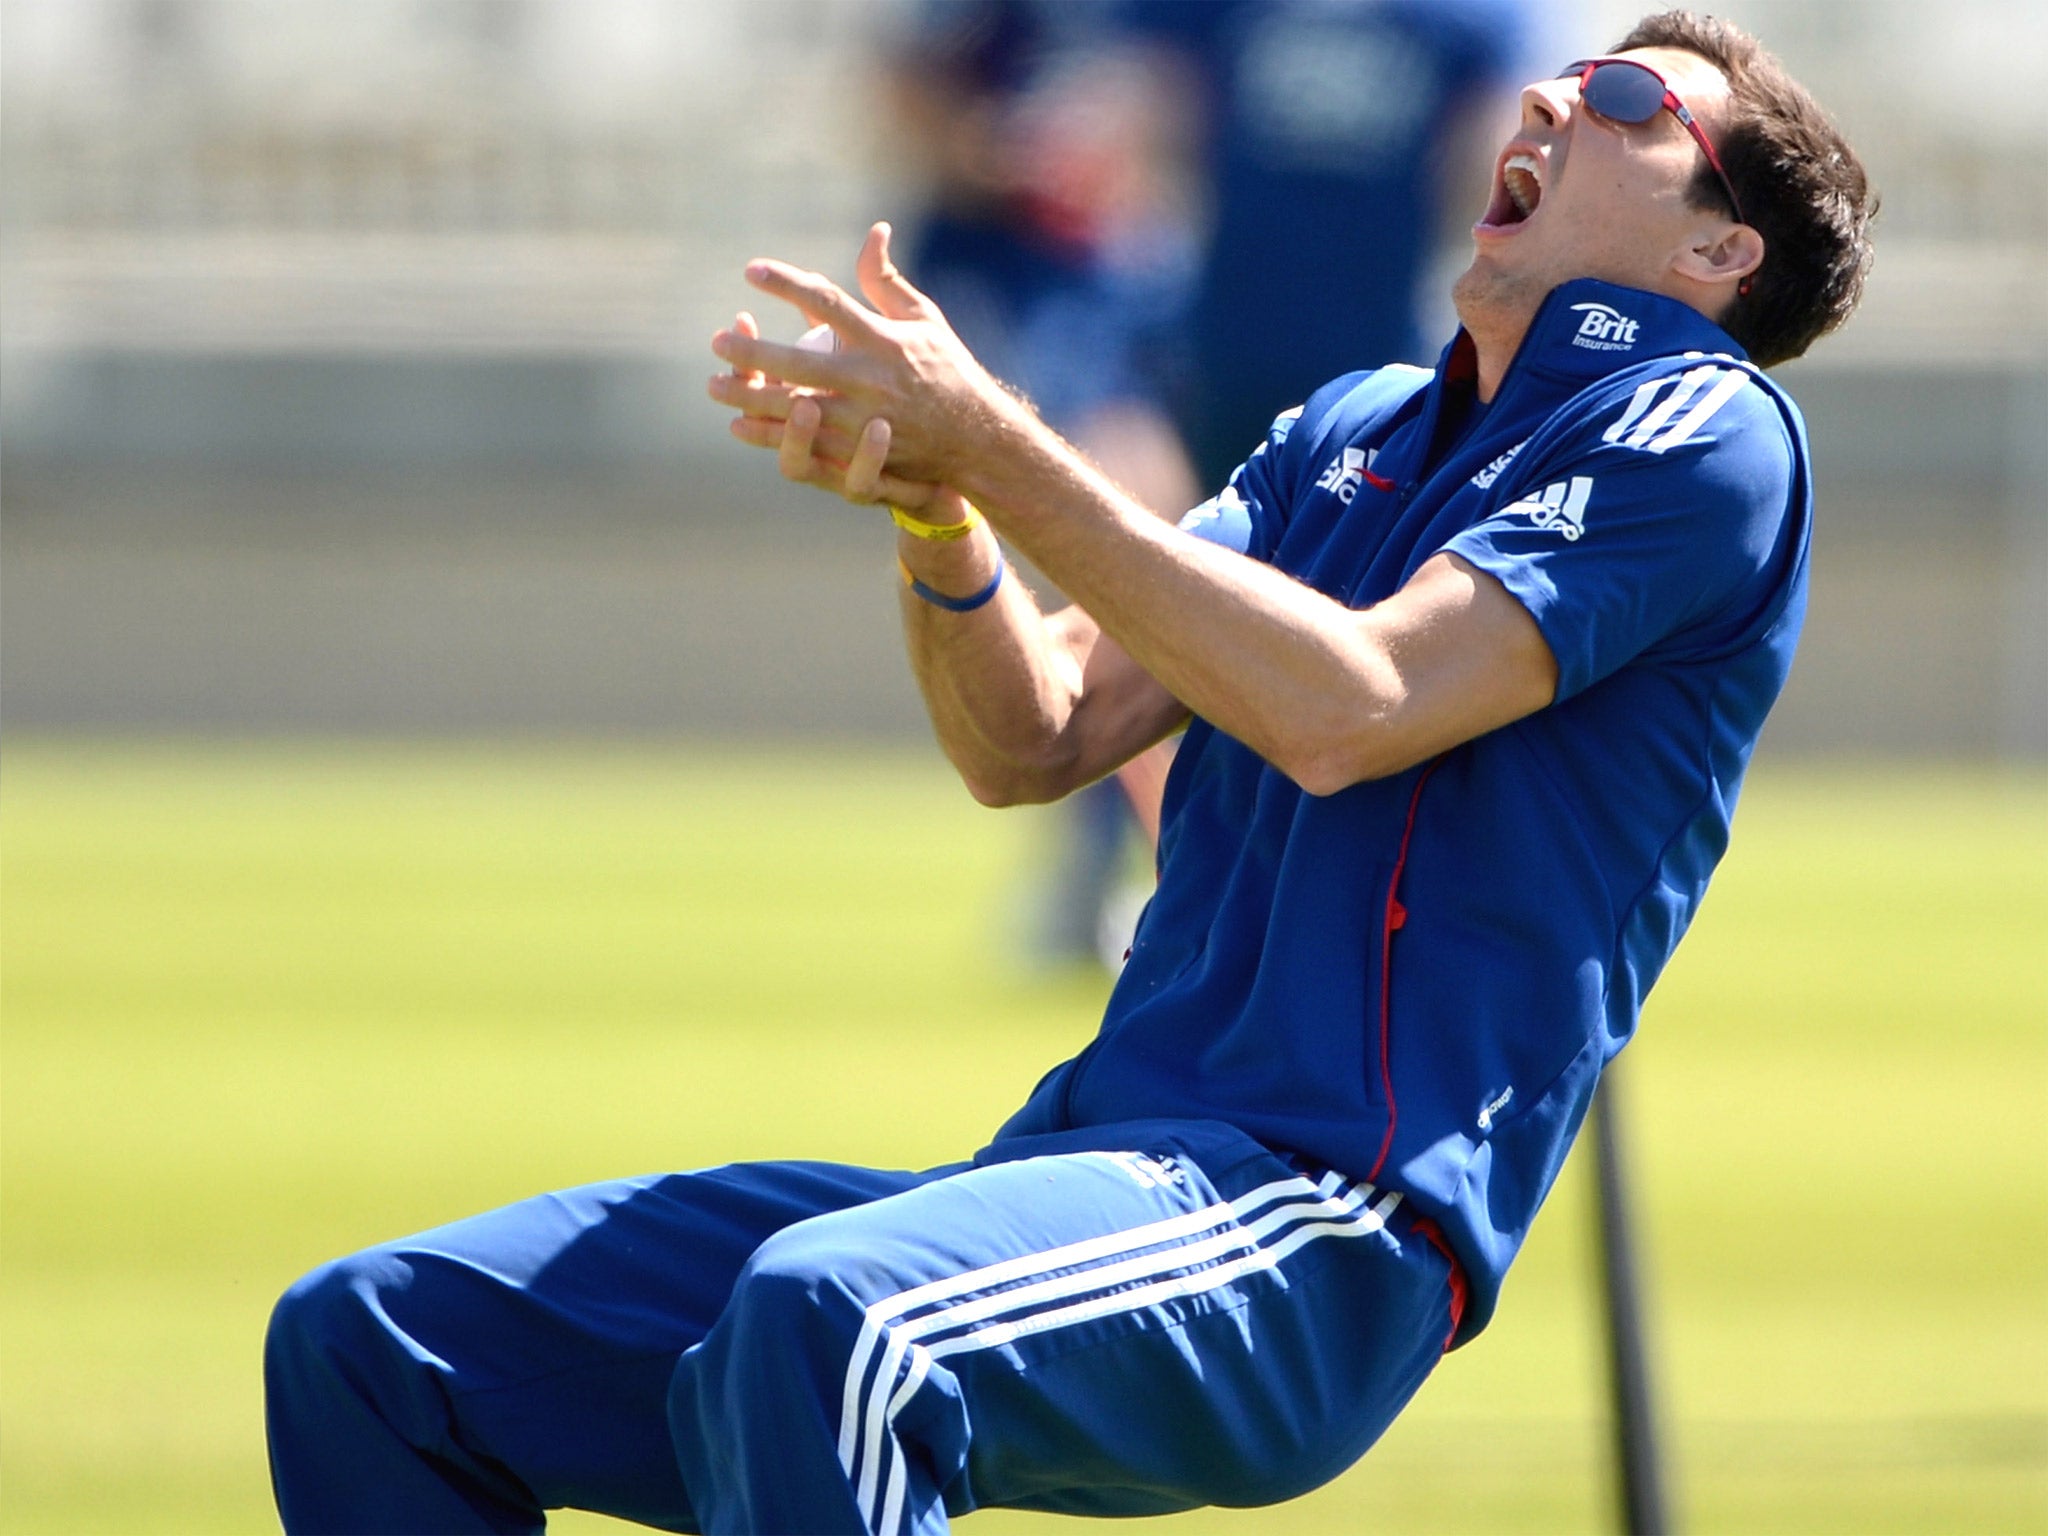 Steven Finn was back in training with England at Trent Bridge